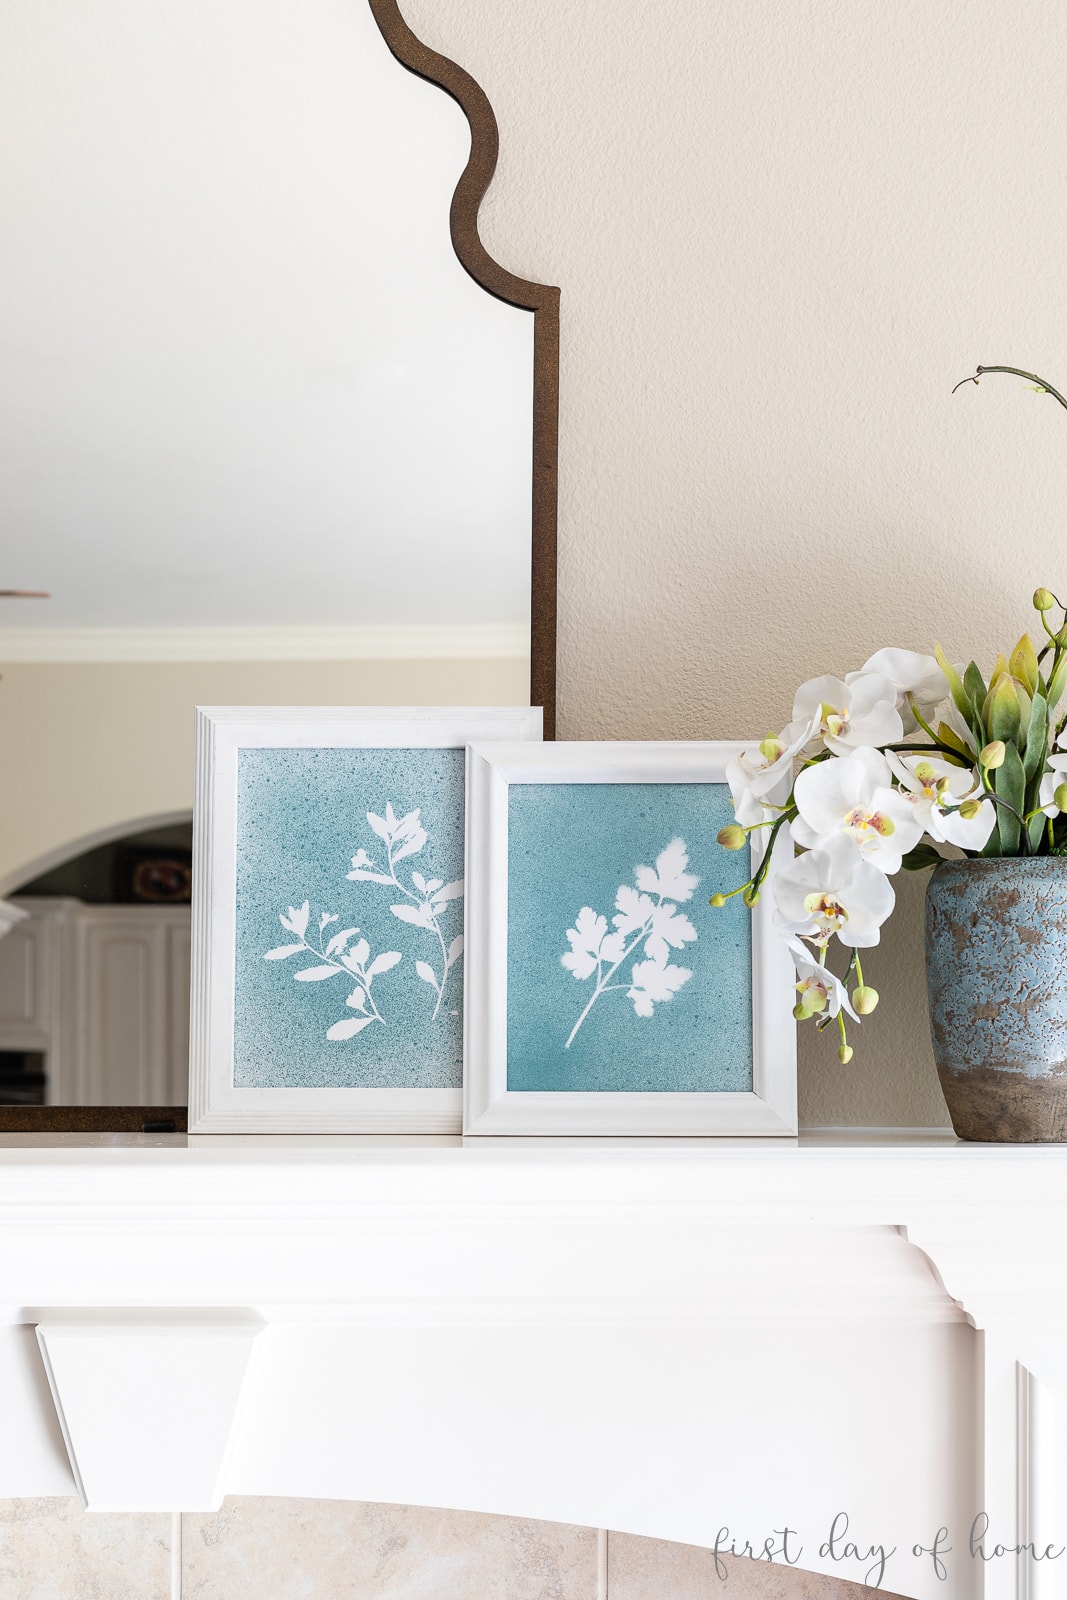 Pressed flower wall art shown in white frames next to faux floral arrangement on fireplace mantel